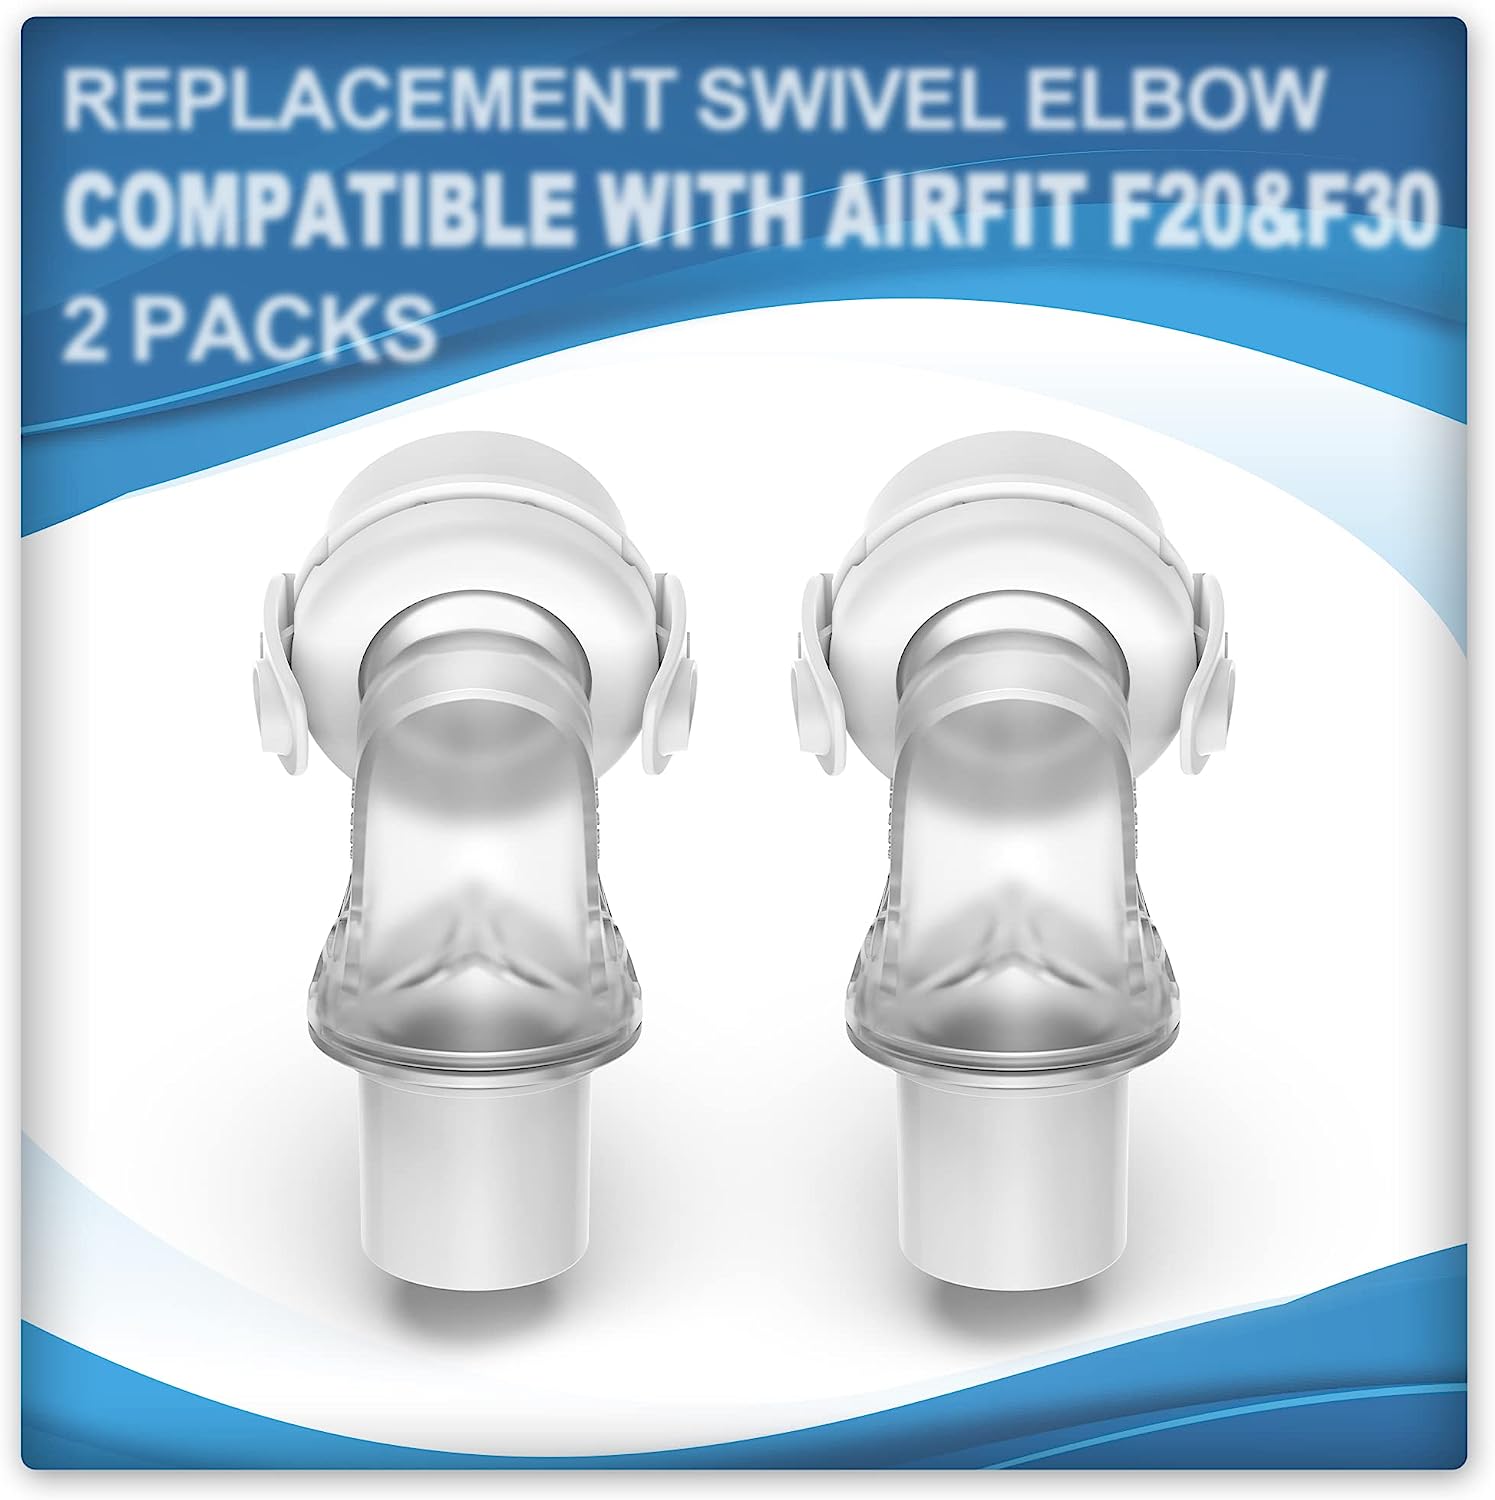 2 Packs Replacement Swivel Elbow Connector Compatible with F20 and F30,Tube Quick-Release Elbow,Great-Value Supplies by Medihealer